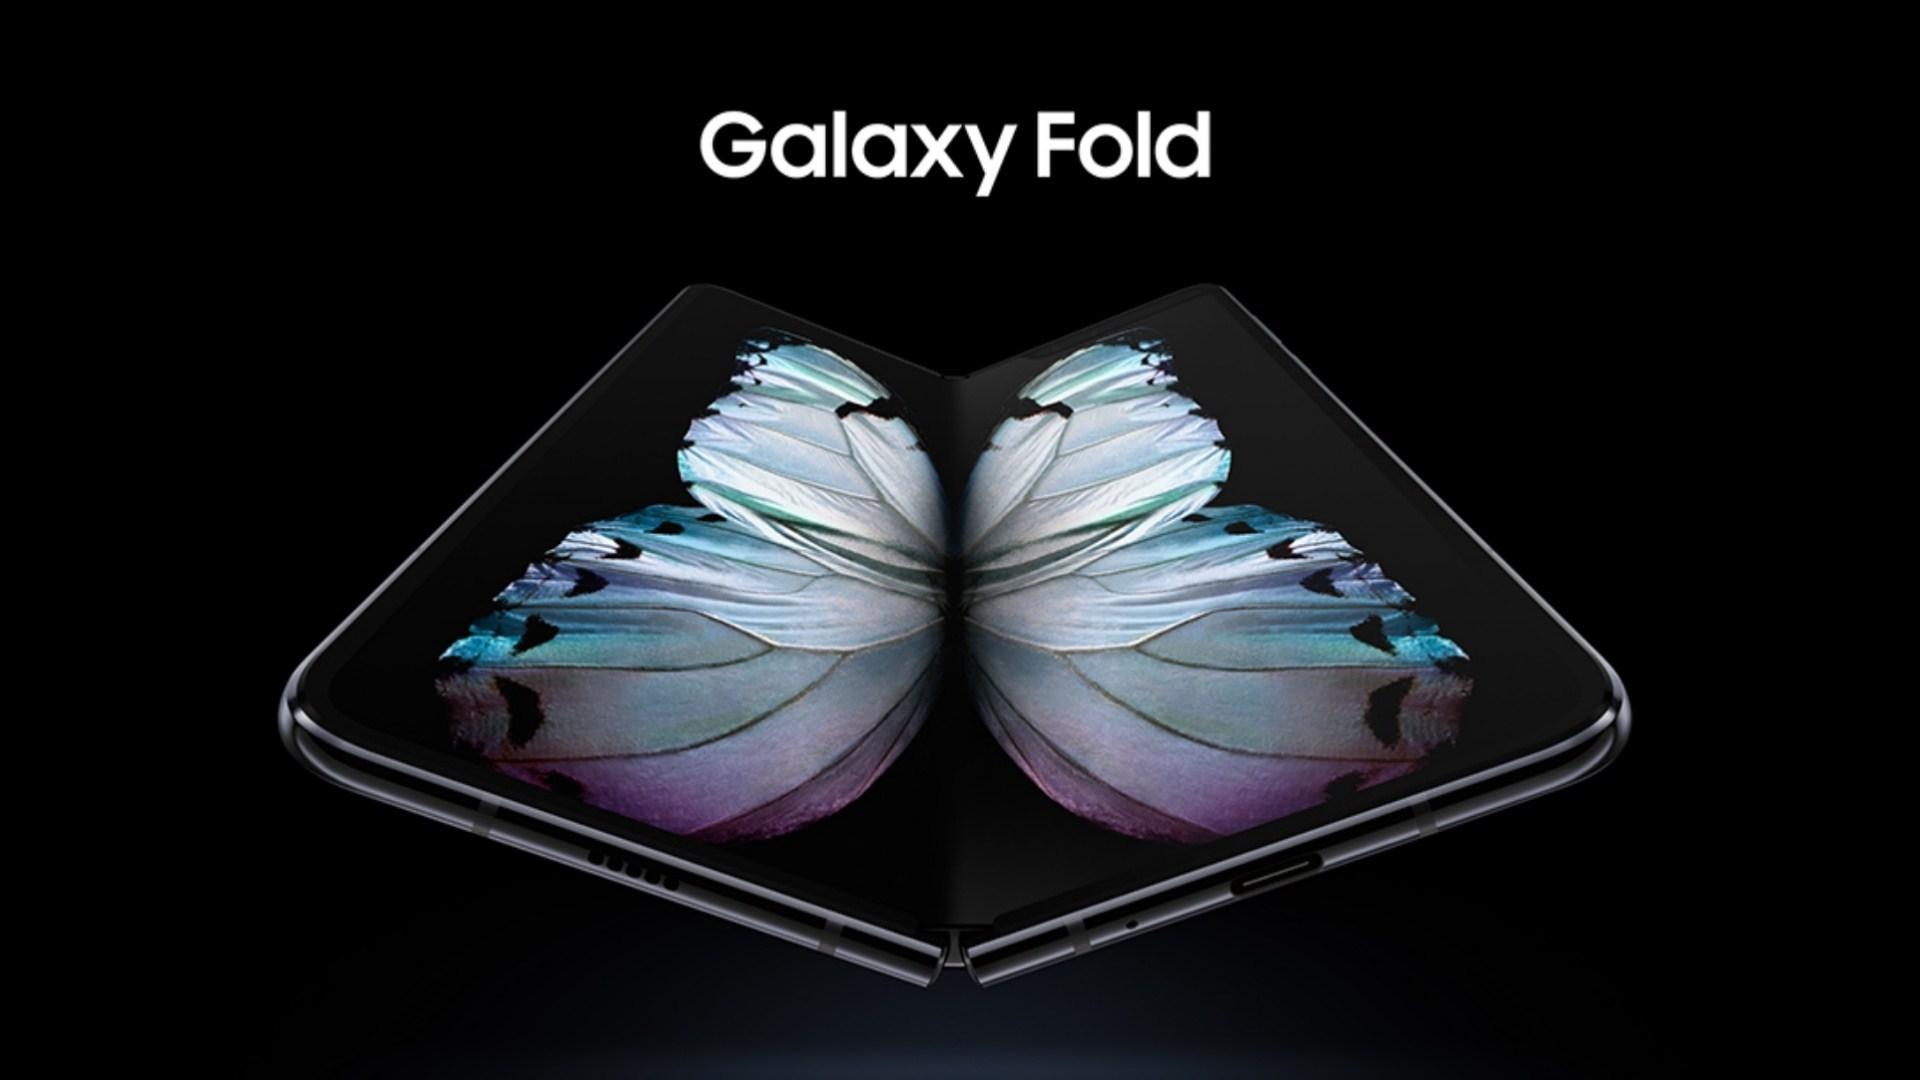 Hands On With The Samsung Galaxy Fold And Hate Relationship